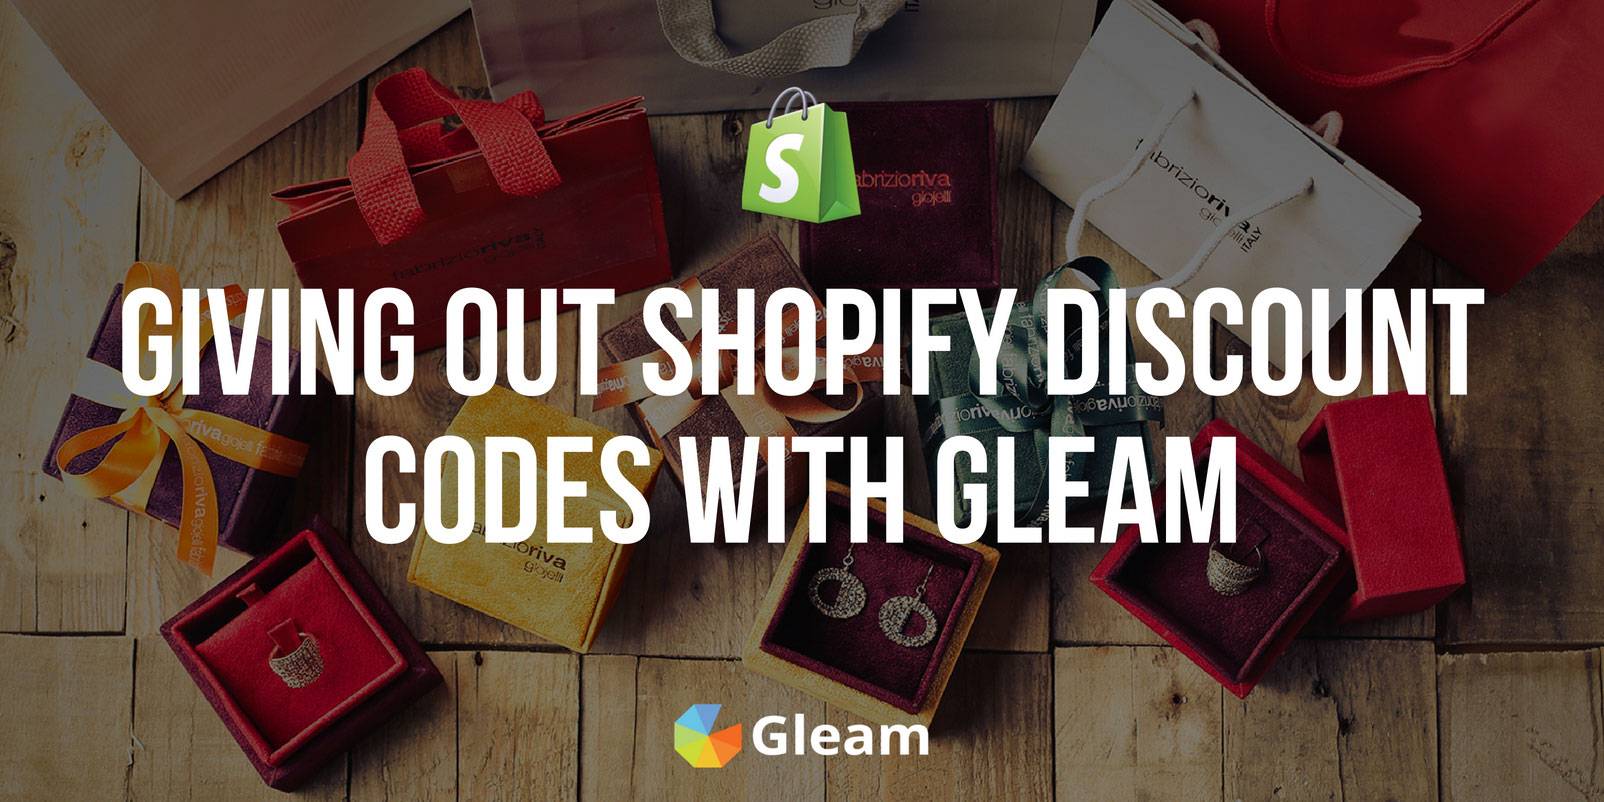 How to Give Out Shopify Coupon Codes with Gleam